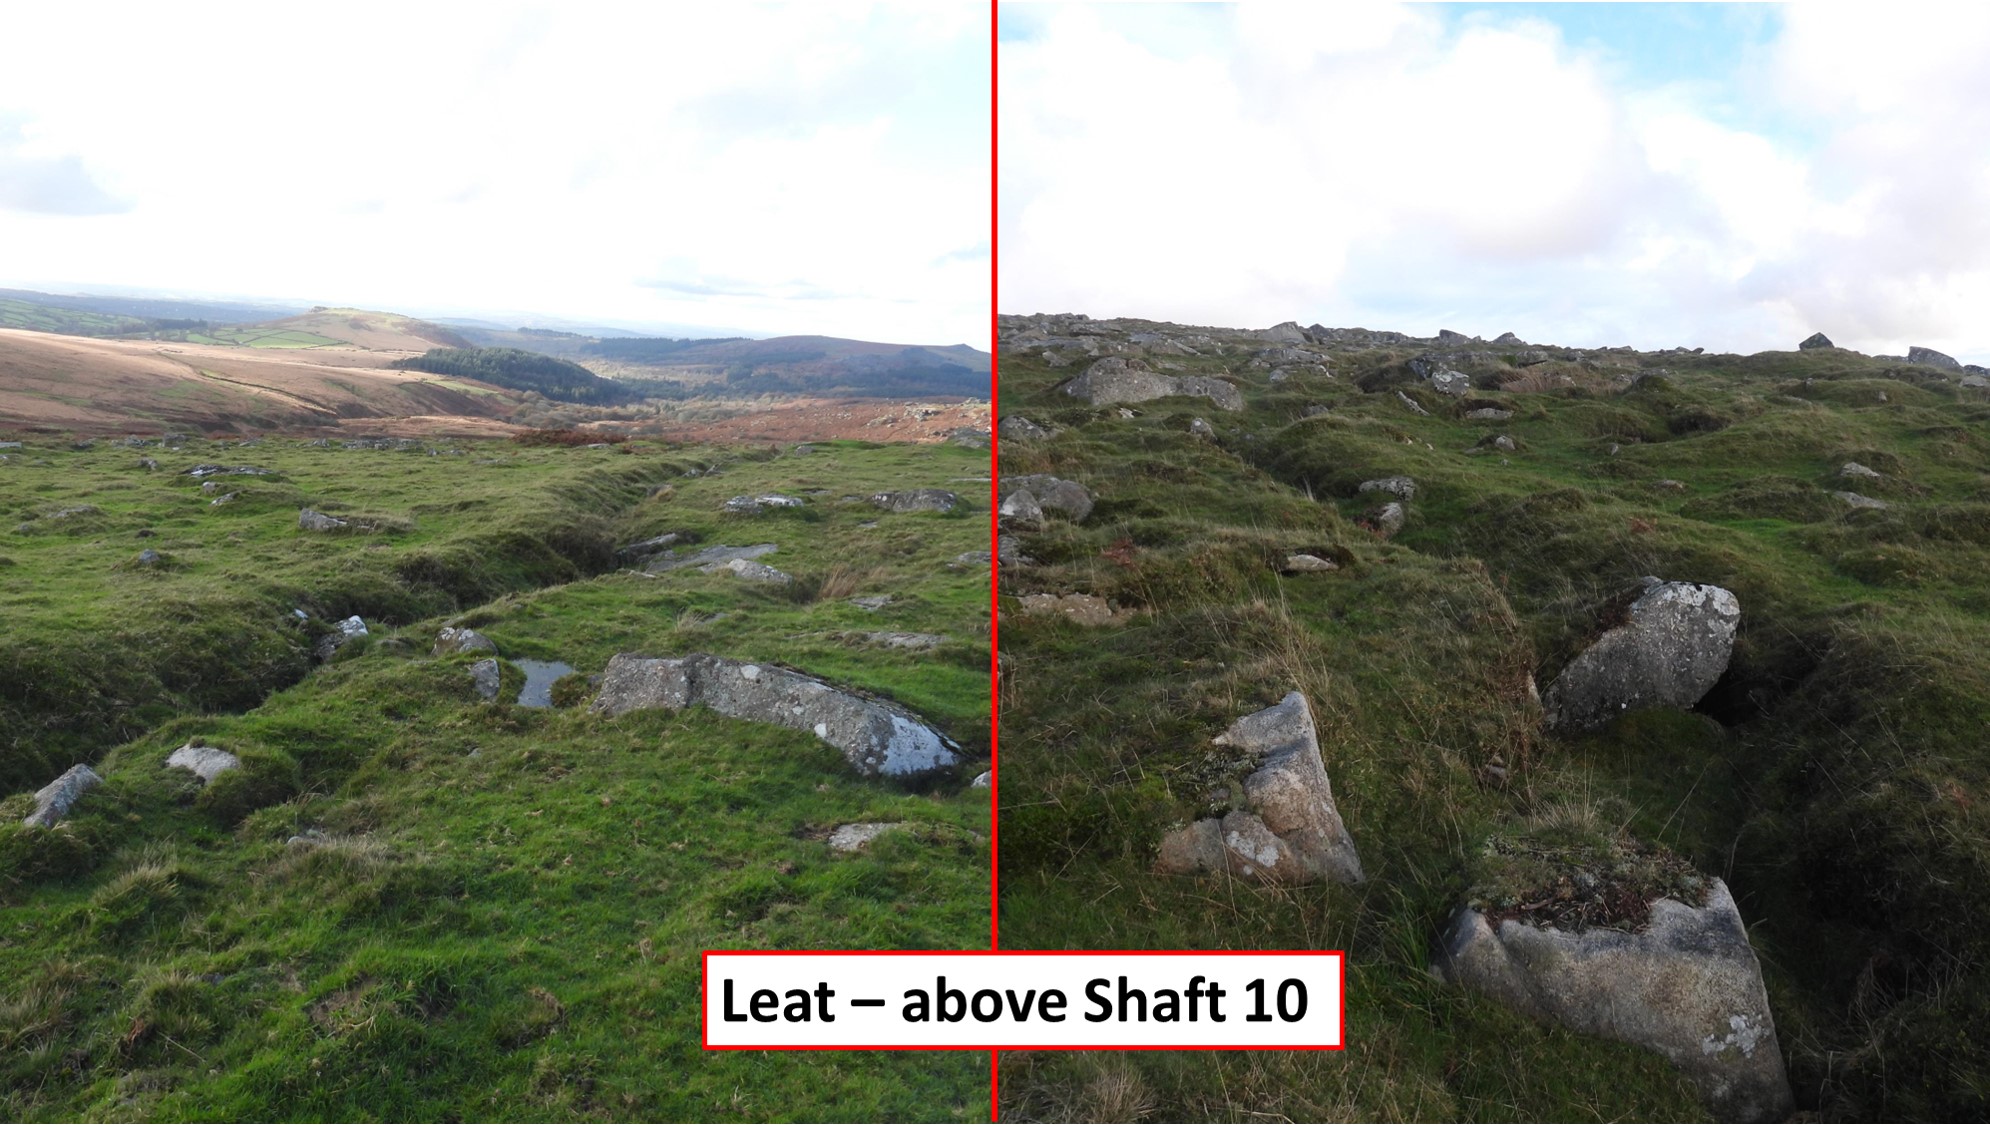 23. Leat above shaft 10